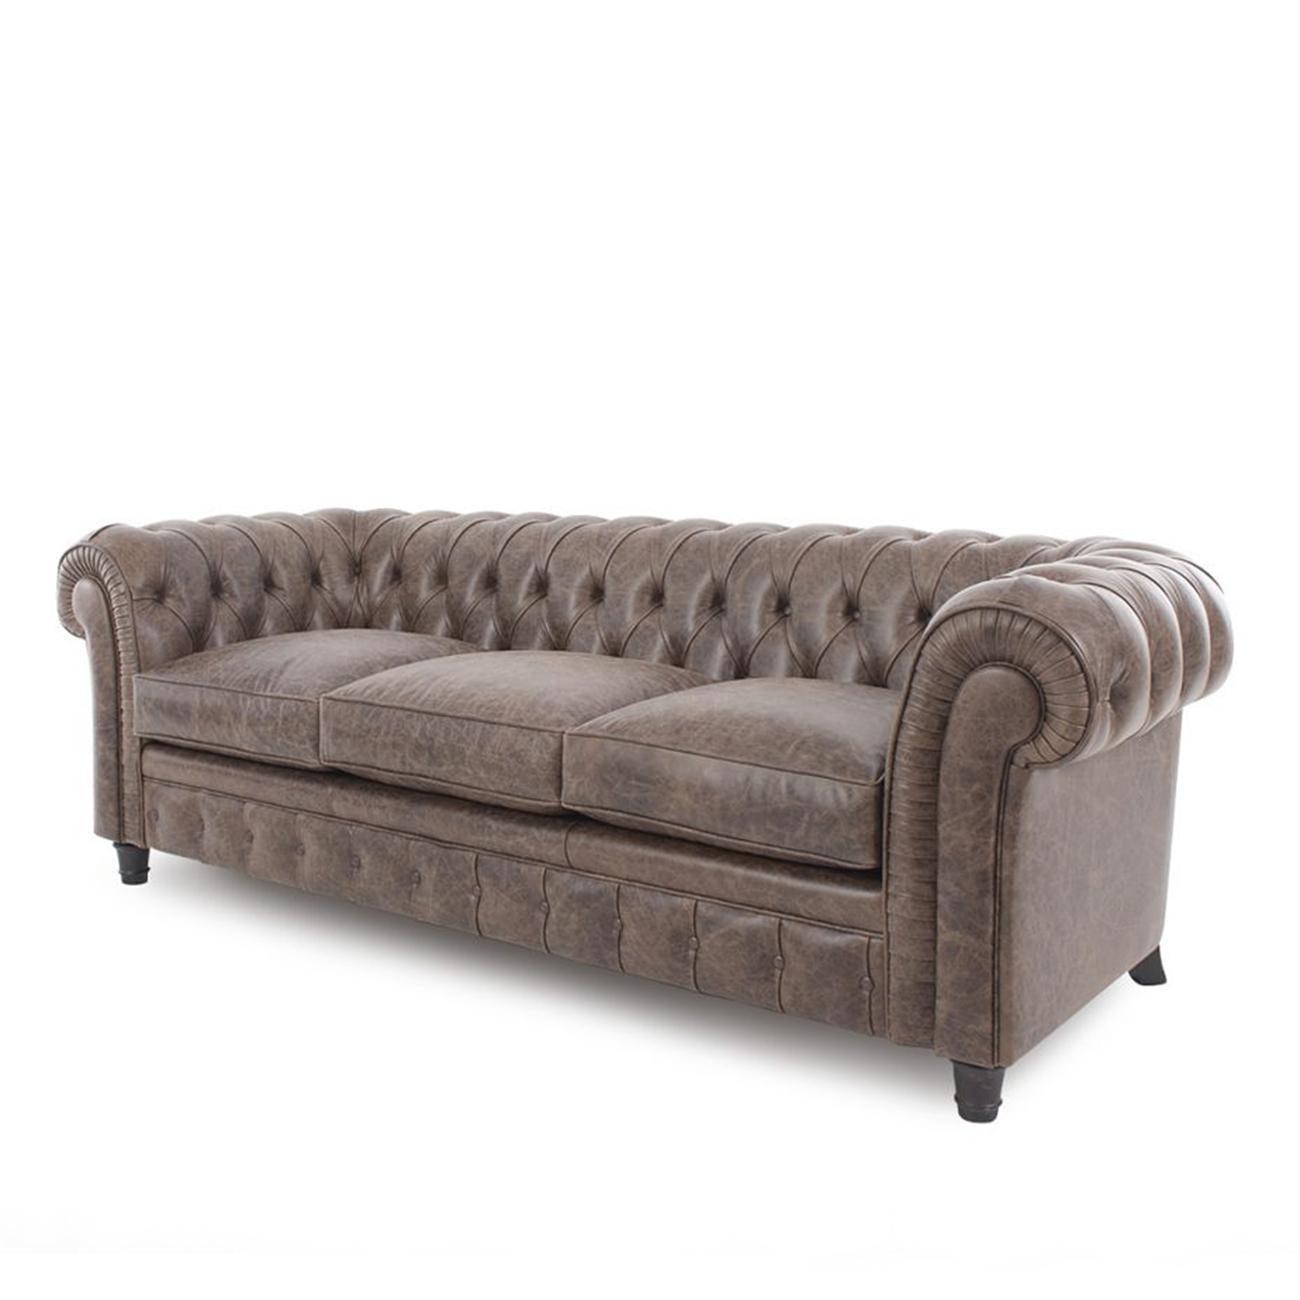 Sofa Chester Patinated 3 with all structure in solid beech wood,
upholstered and covered with hand patinated high quality leather,
in taupe finish. With capitonated backrest and armrests.
With circular feet in matt dark Brown finish.
Also